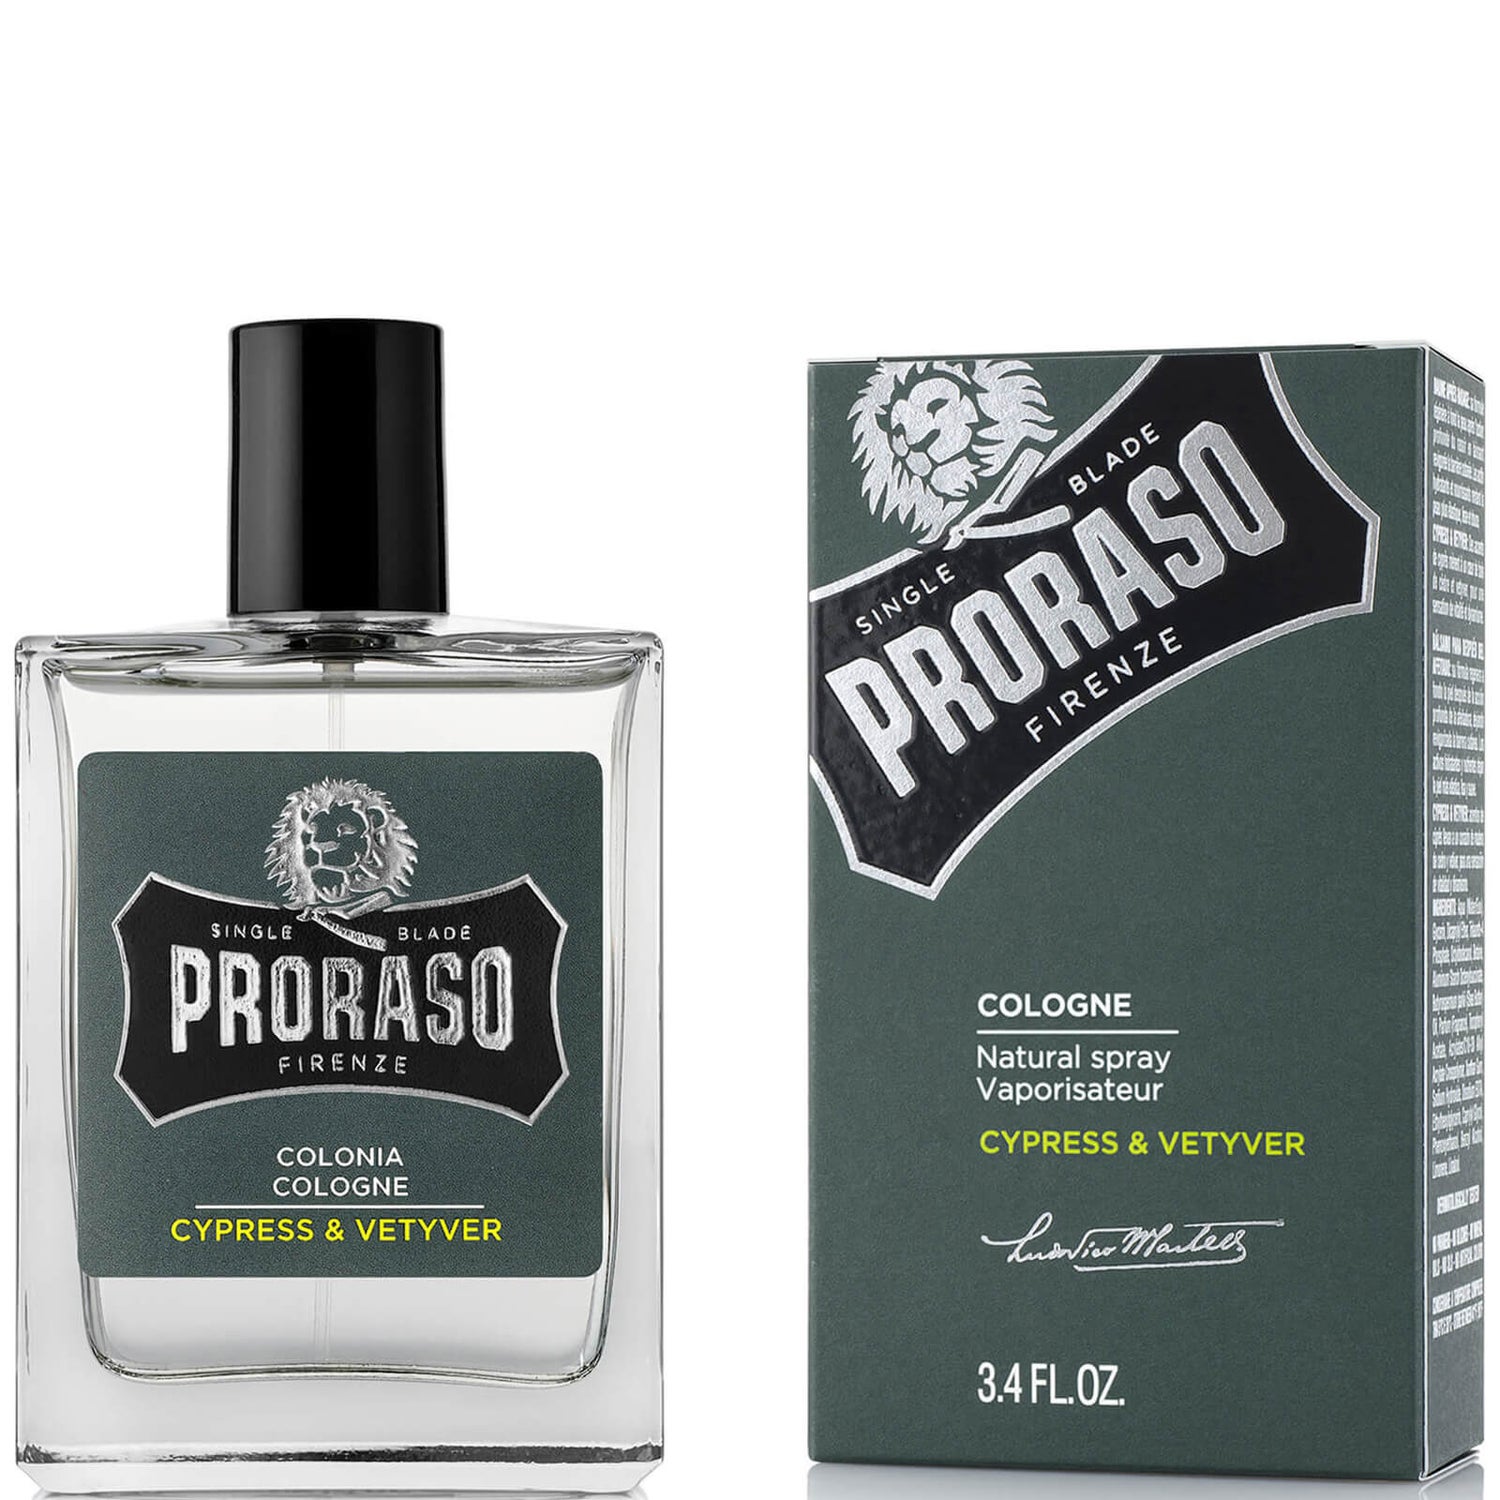 Proraso Cypress and Vetyver Cologne 100ml